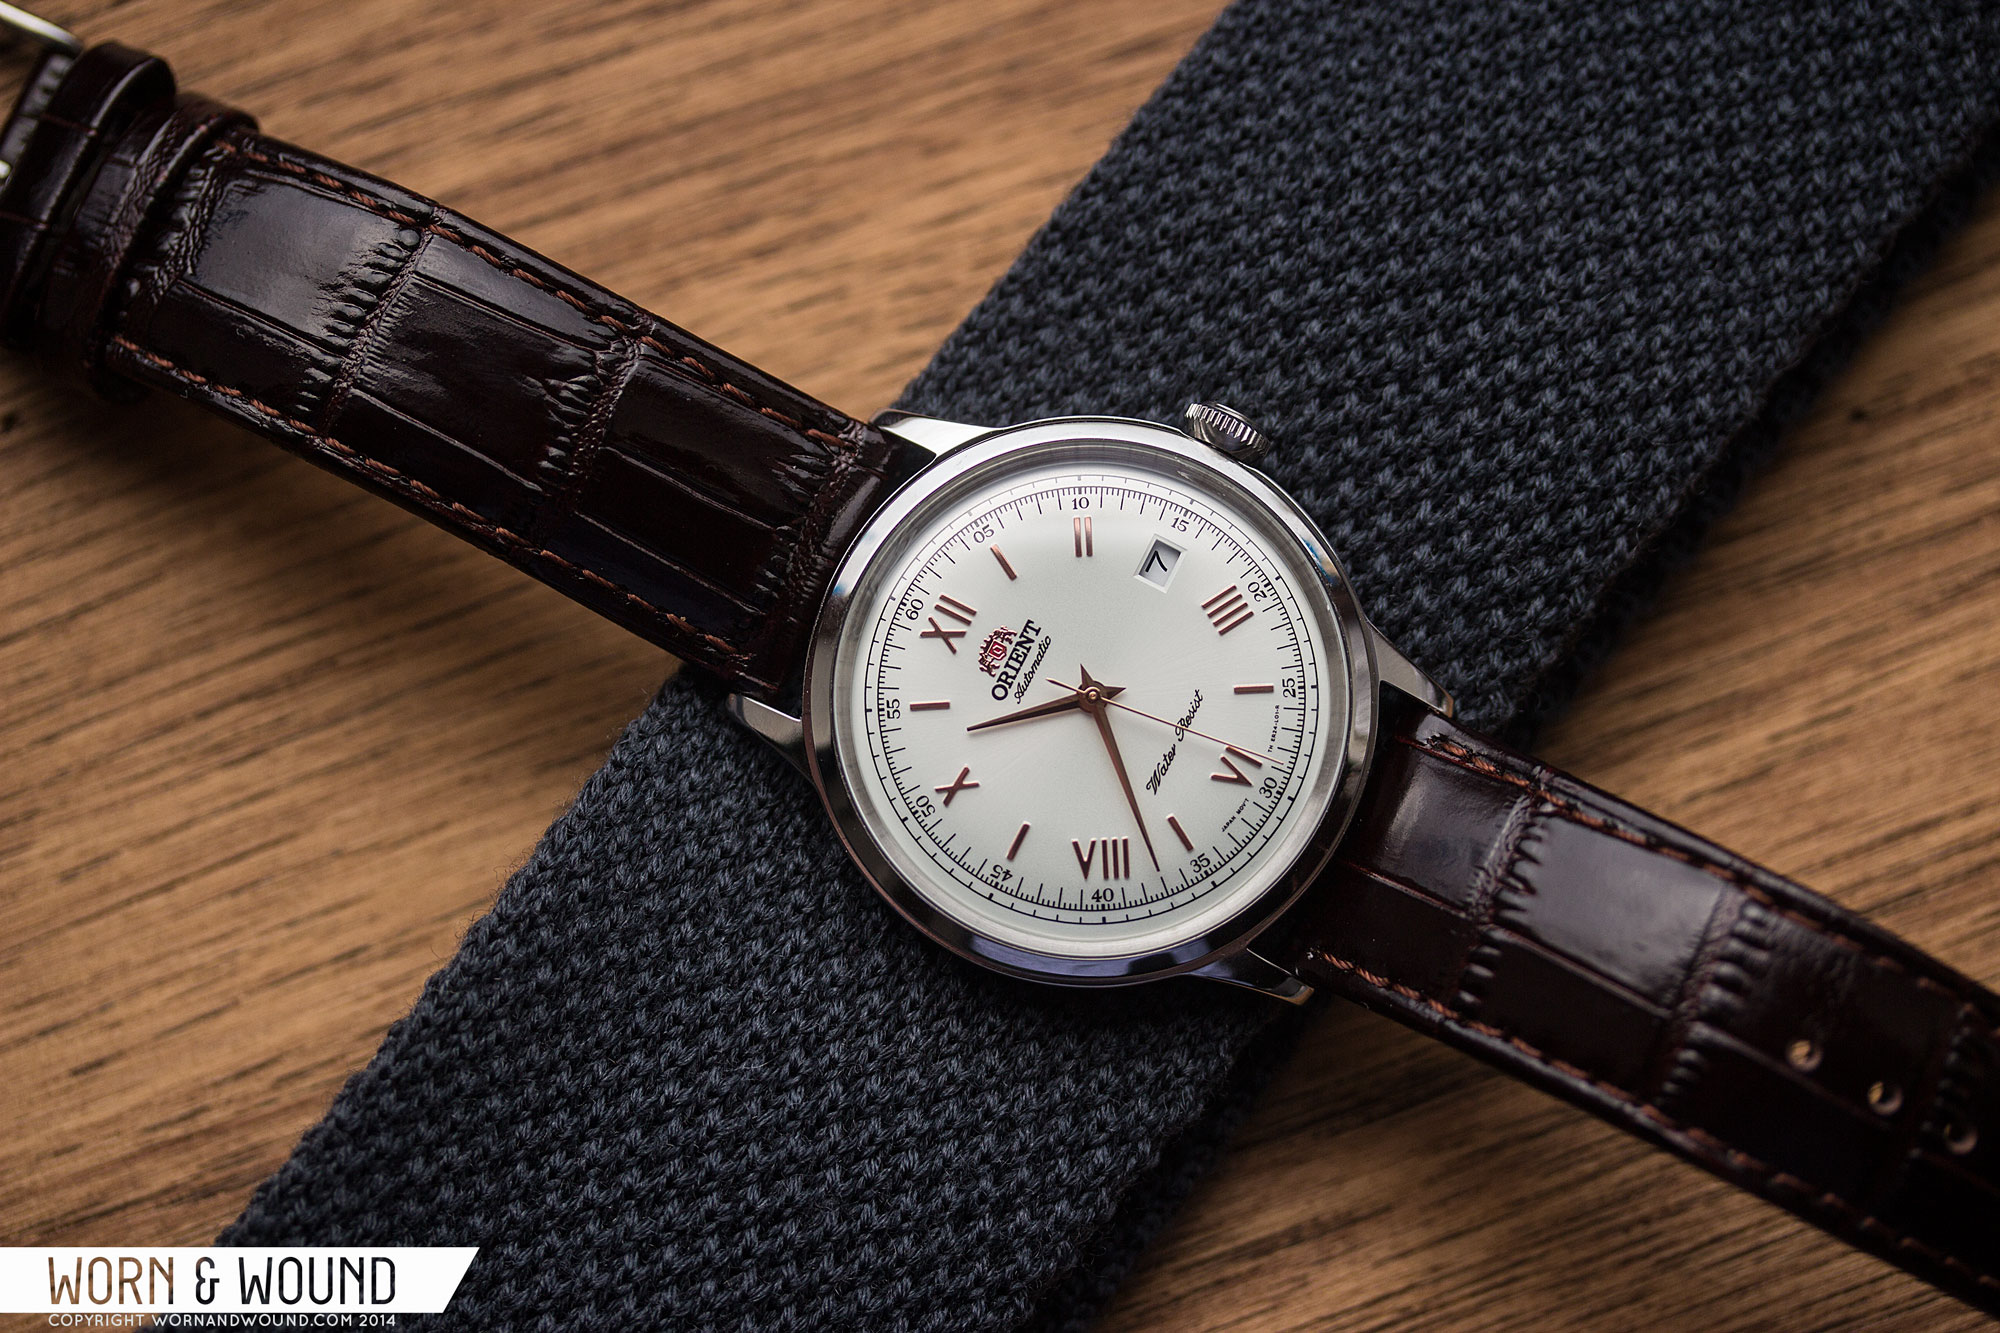 Orient Bambino FER2400BW0 Review - Worn & Wound